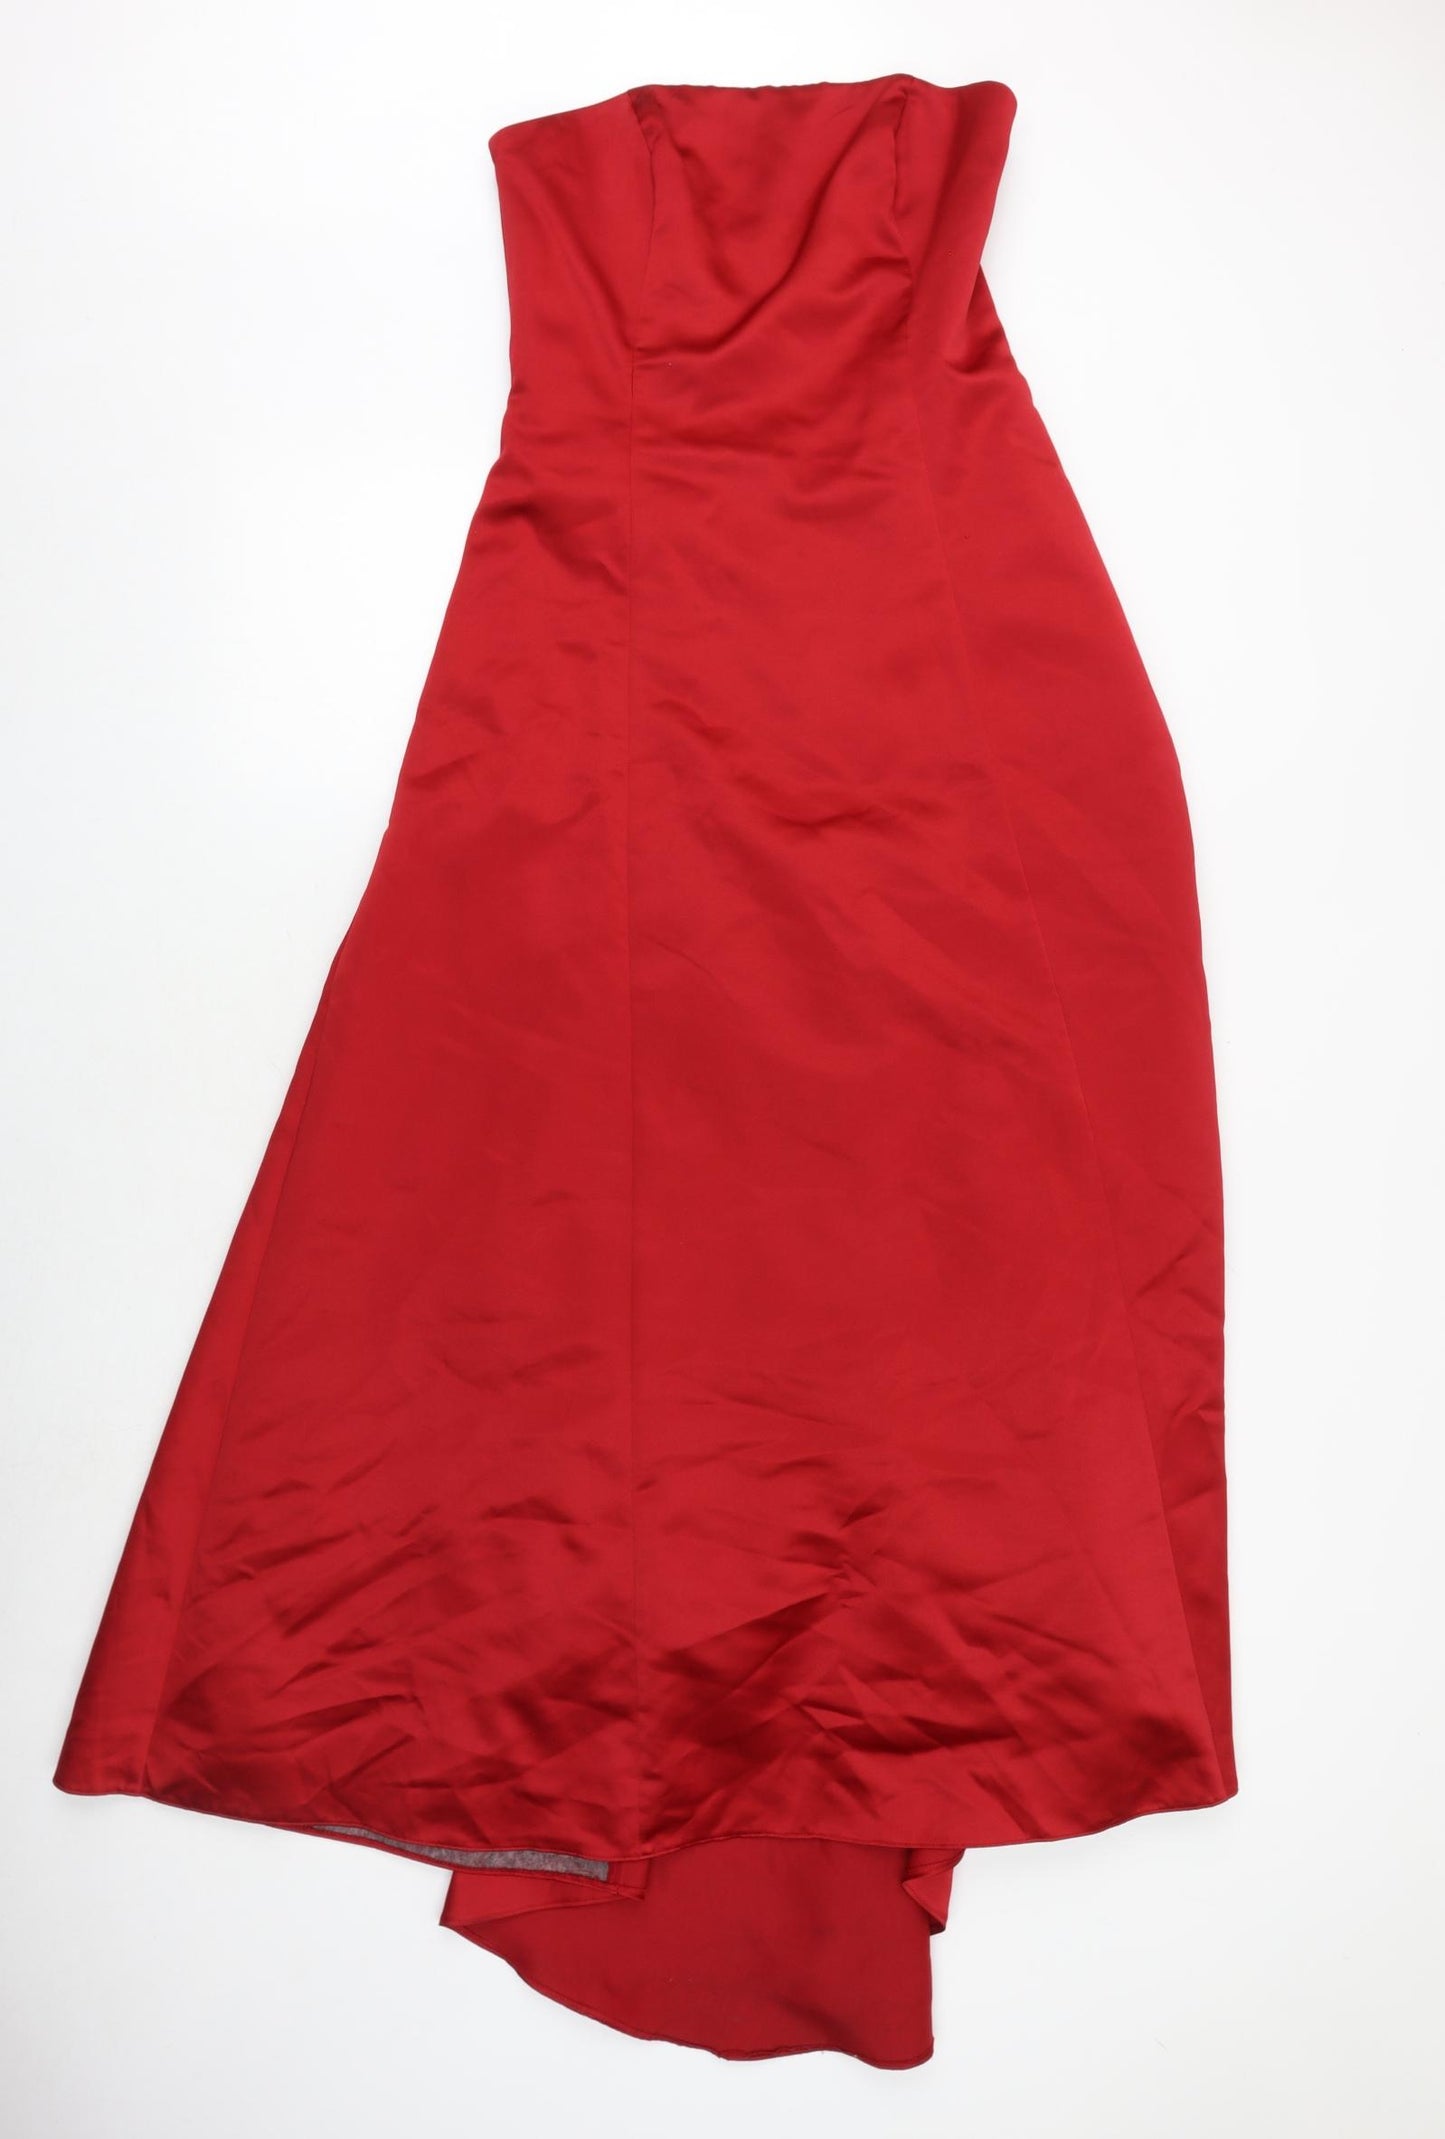 Debut Womens Red Polyester Ball Gown Size 10 Off the Shoulder Zip